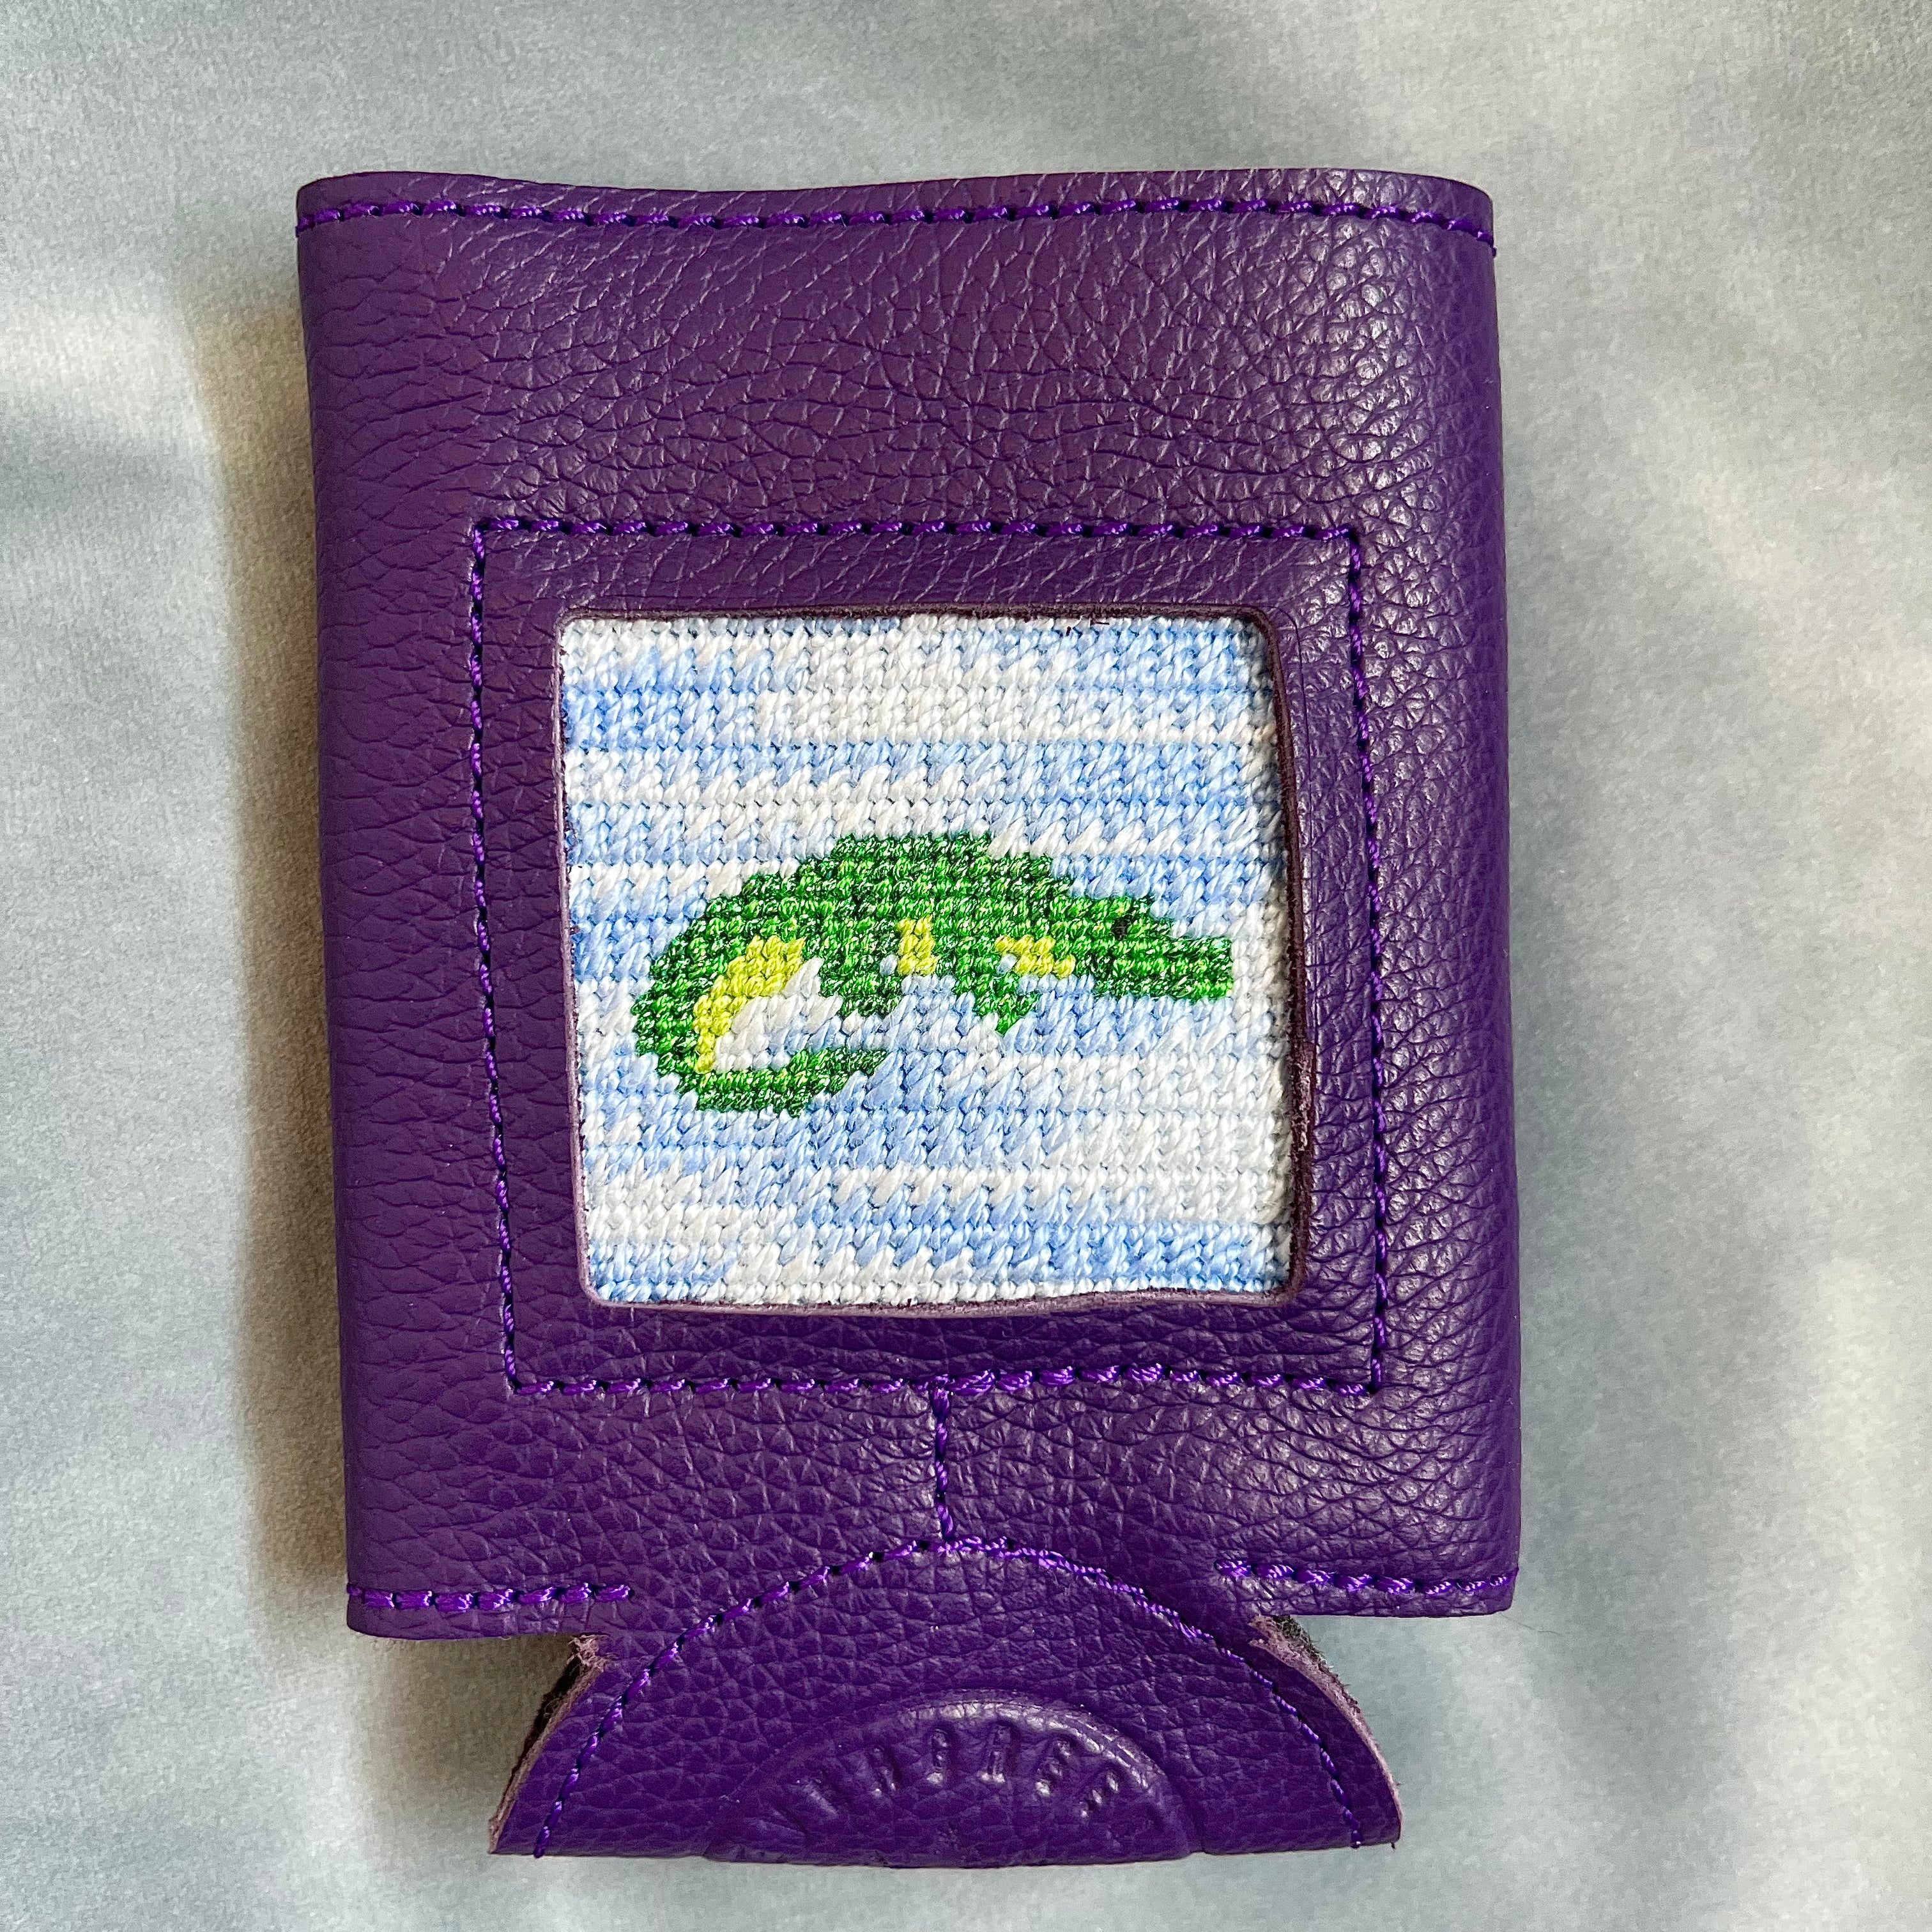 Alligator Canvas Insert for Can Cozy